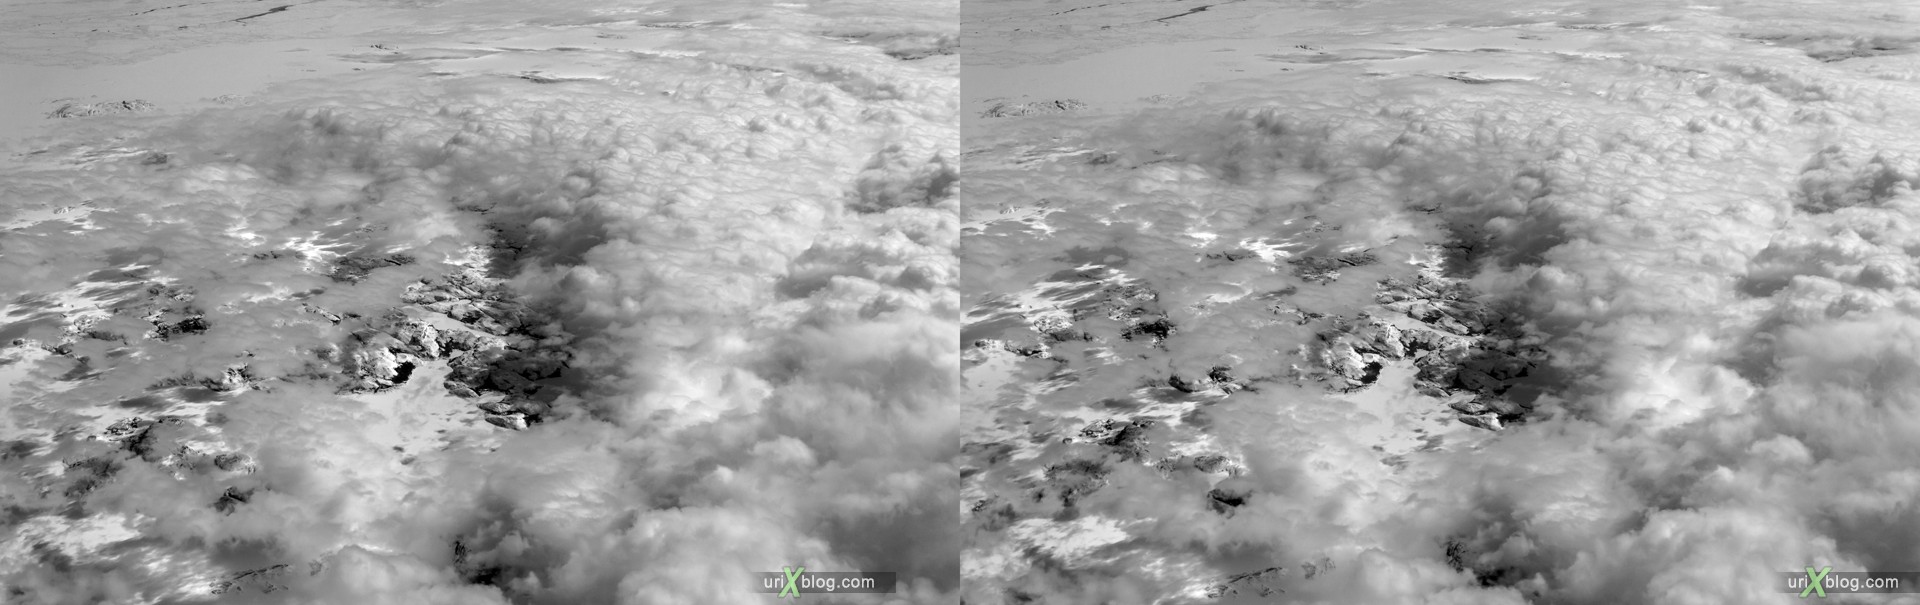 2013, Newfoundland and Labrador, panorama, airplane, black and white, bw, snow, ice, clouds, horizon, 3D, stereo pair, cross-eyed, crossview, cross view stereo pair, stereoscopic